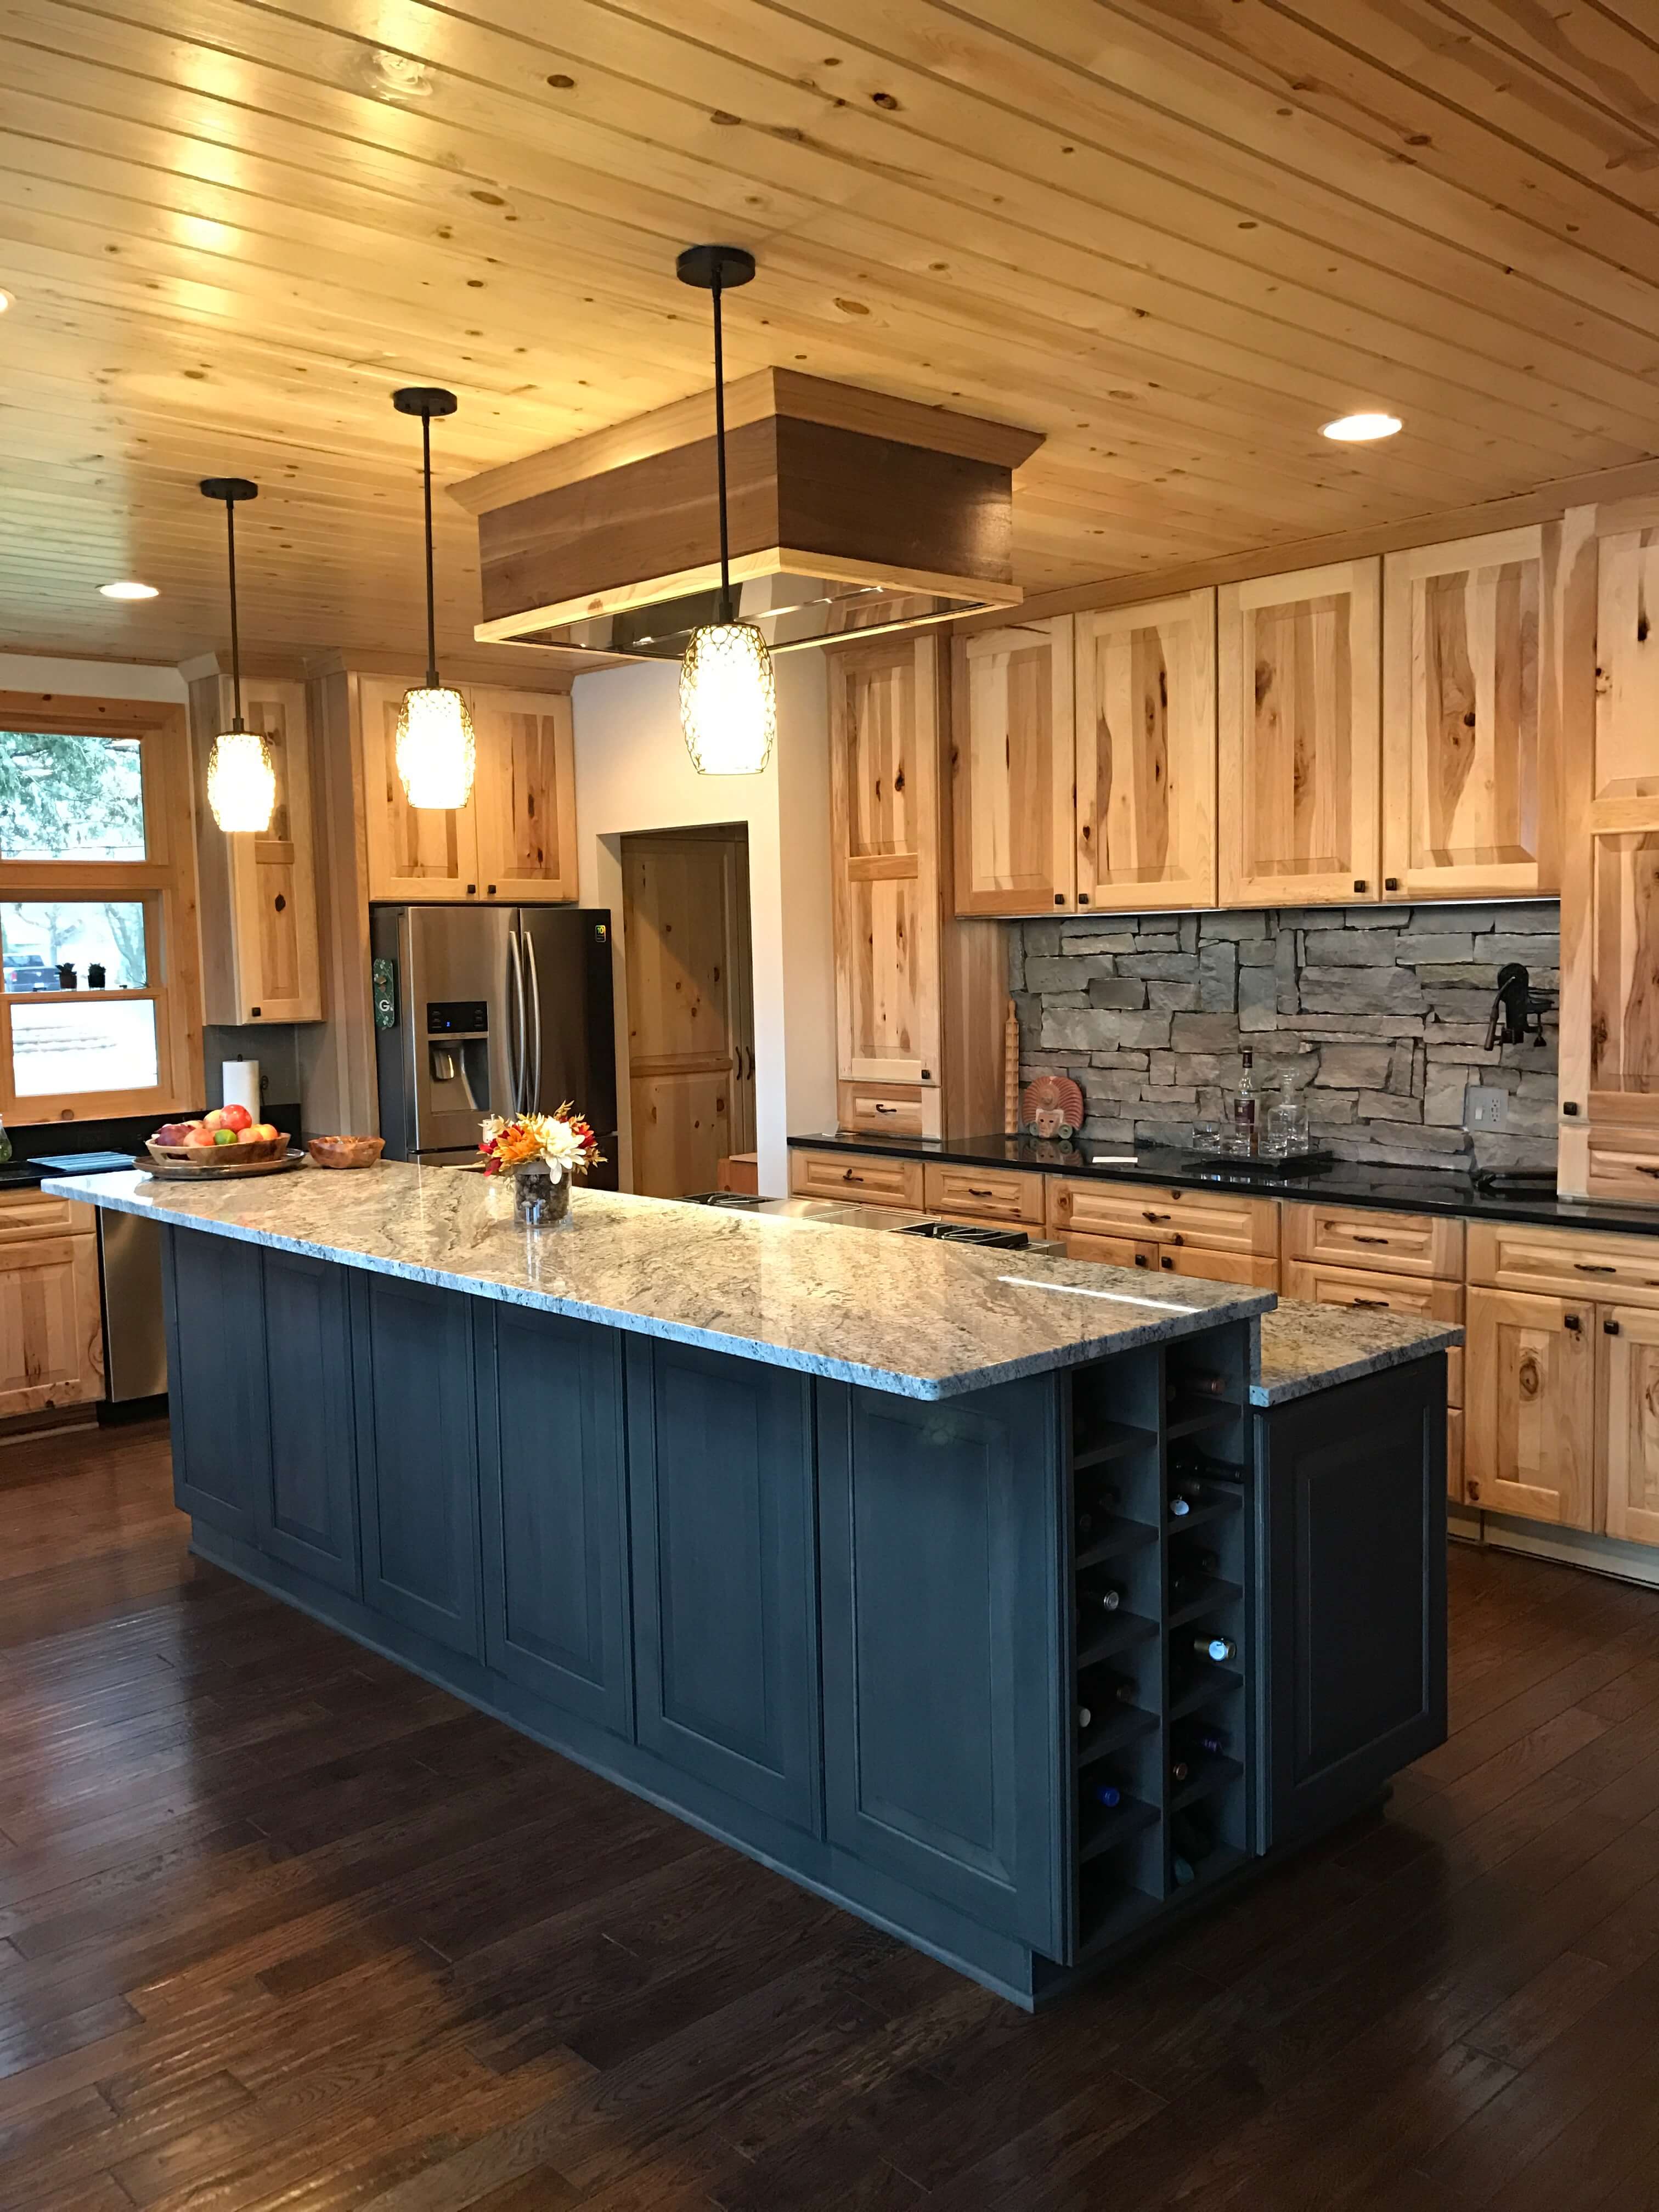 Knotty and Nice Part 2: Explore the Options with Hickory & Rustic